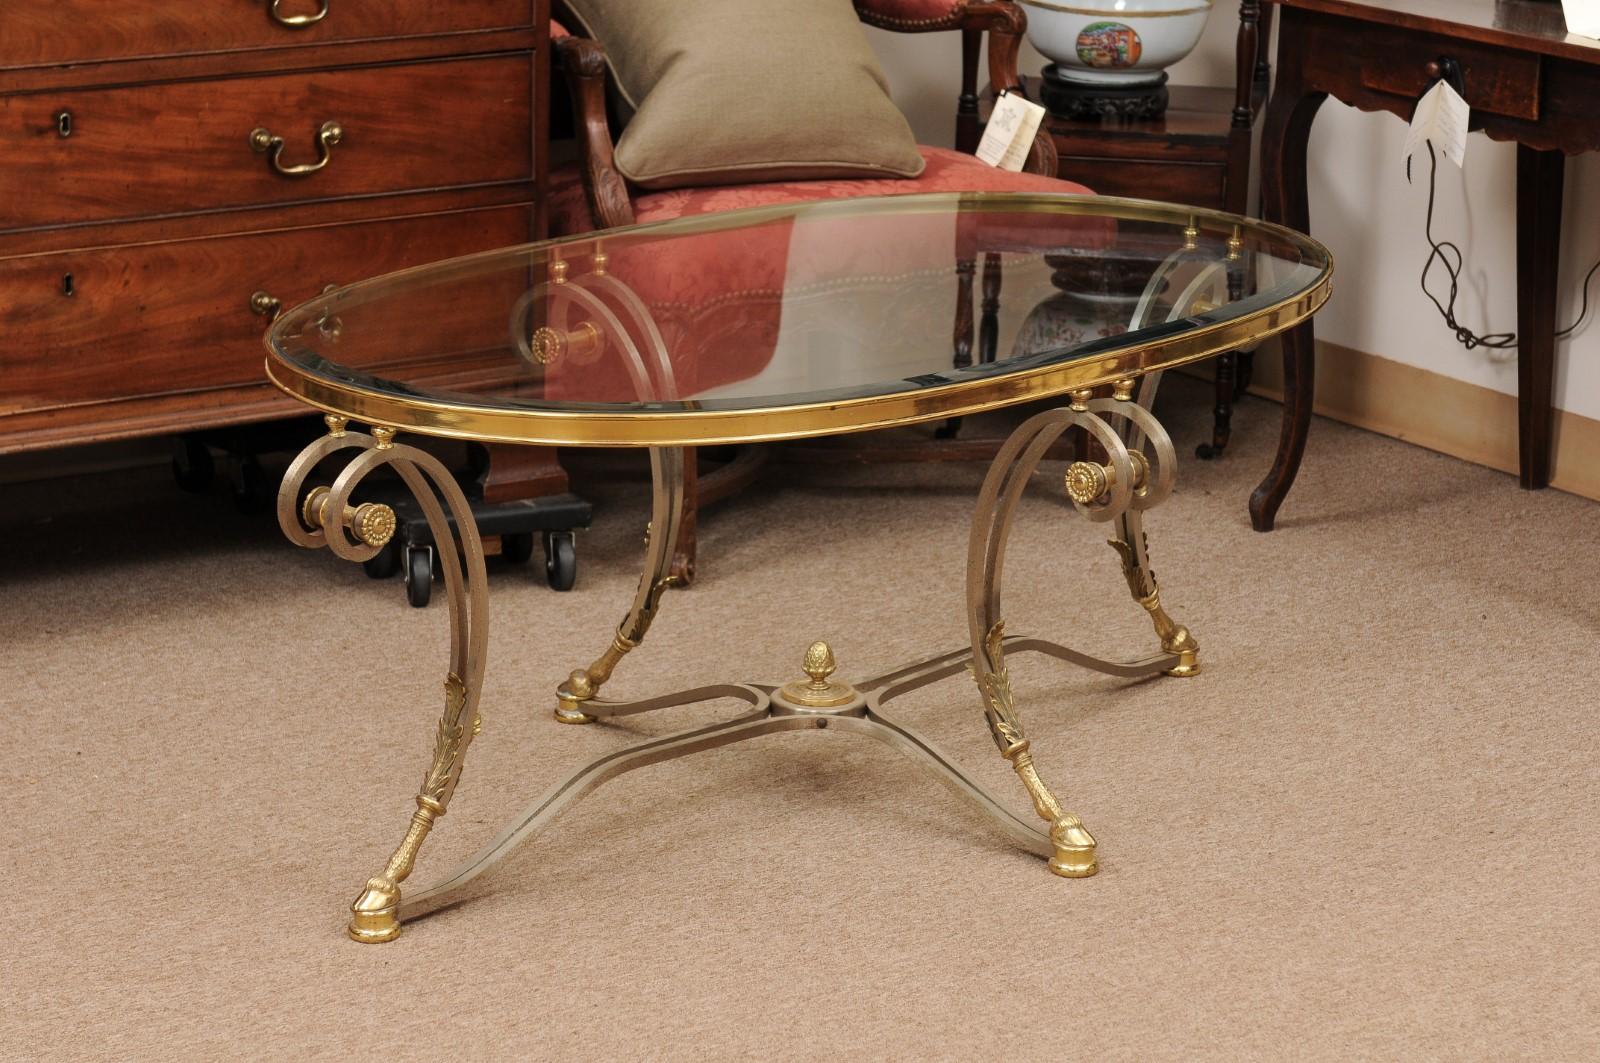 Oval French Steel & Brass Coffee Table with Glass Top, Hoof Feet & Acorn Detail 5